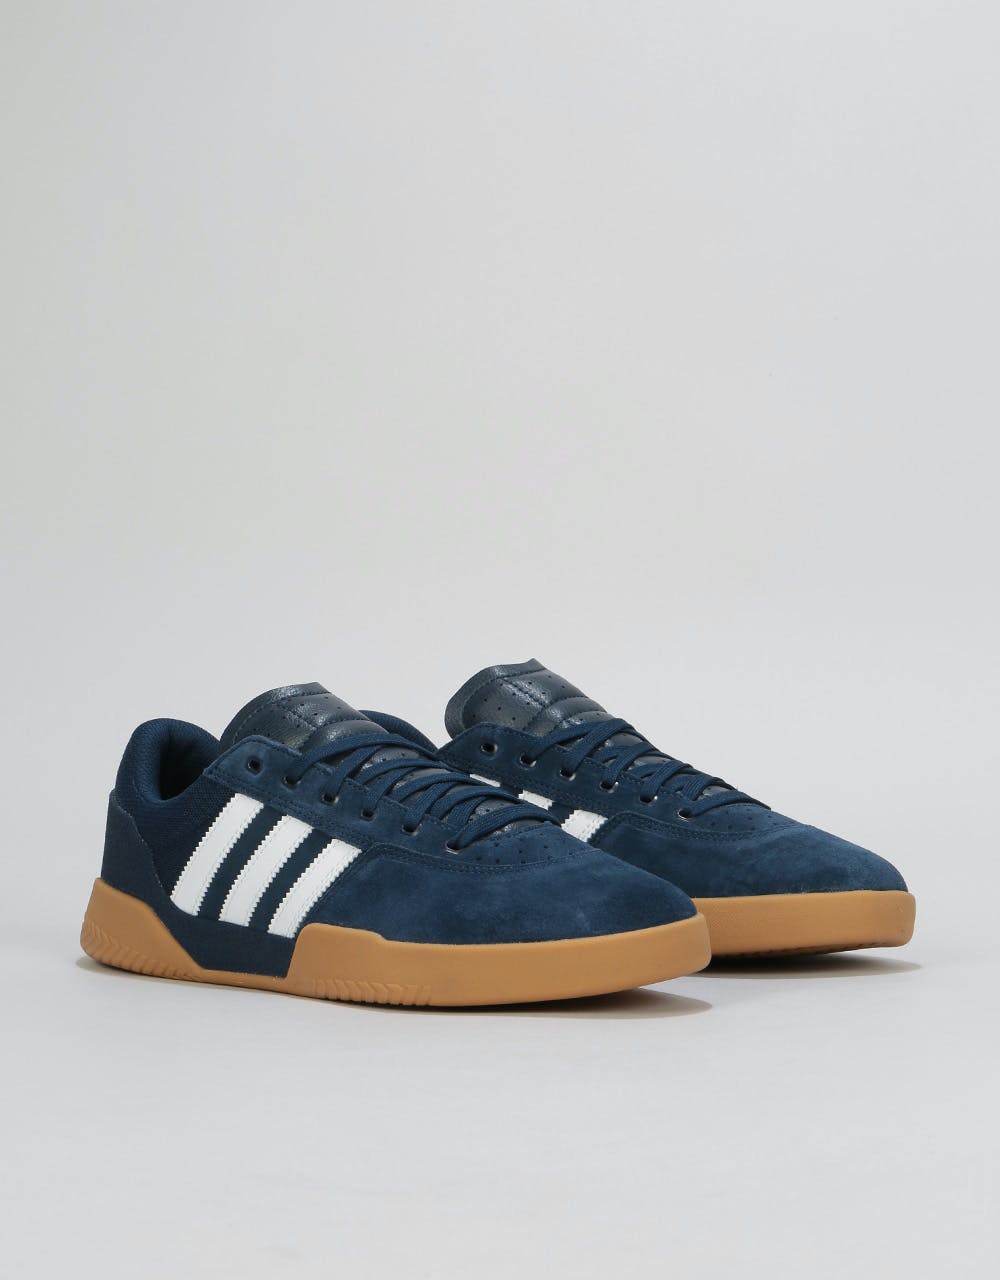 Adidas City Cup Skate Shoes - Collegiate Navy/White/Gum